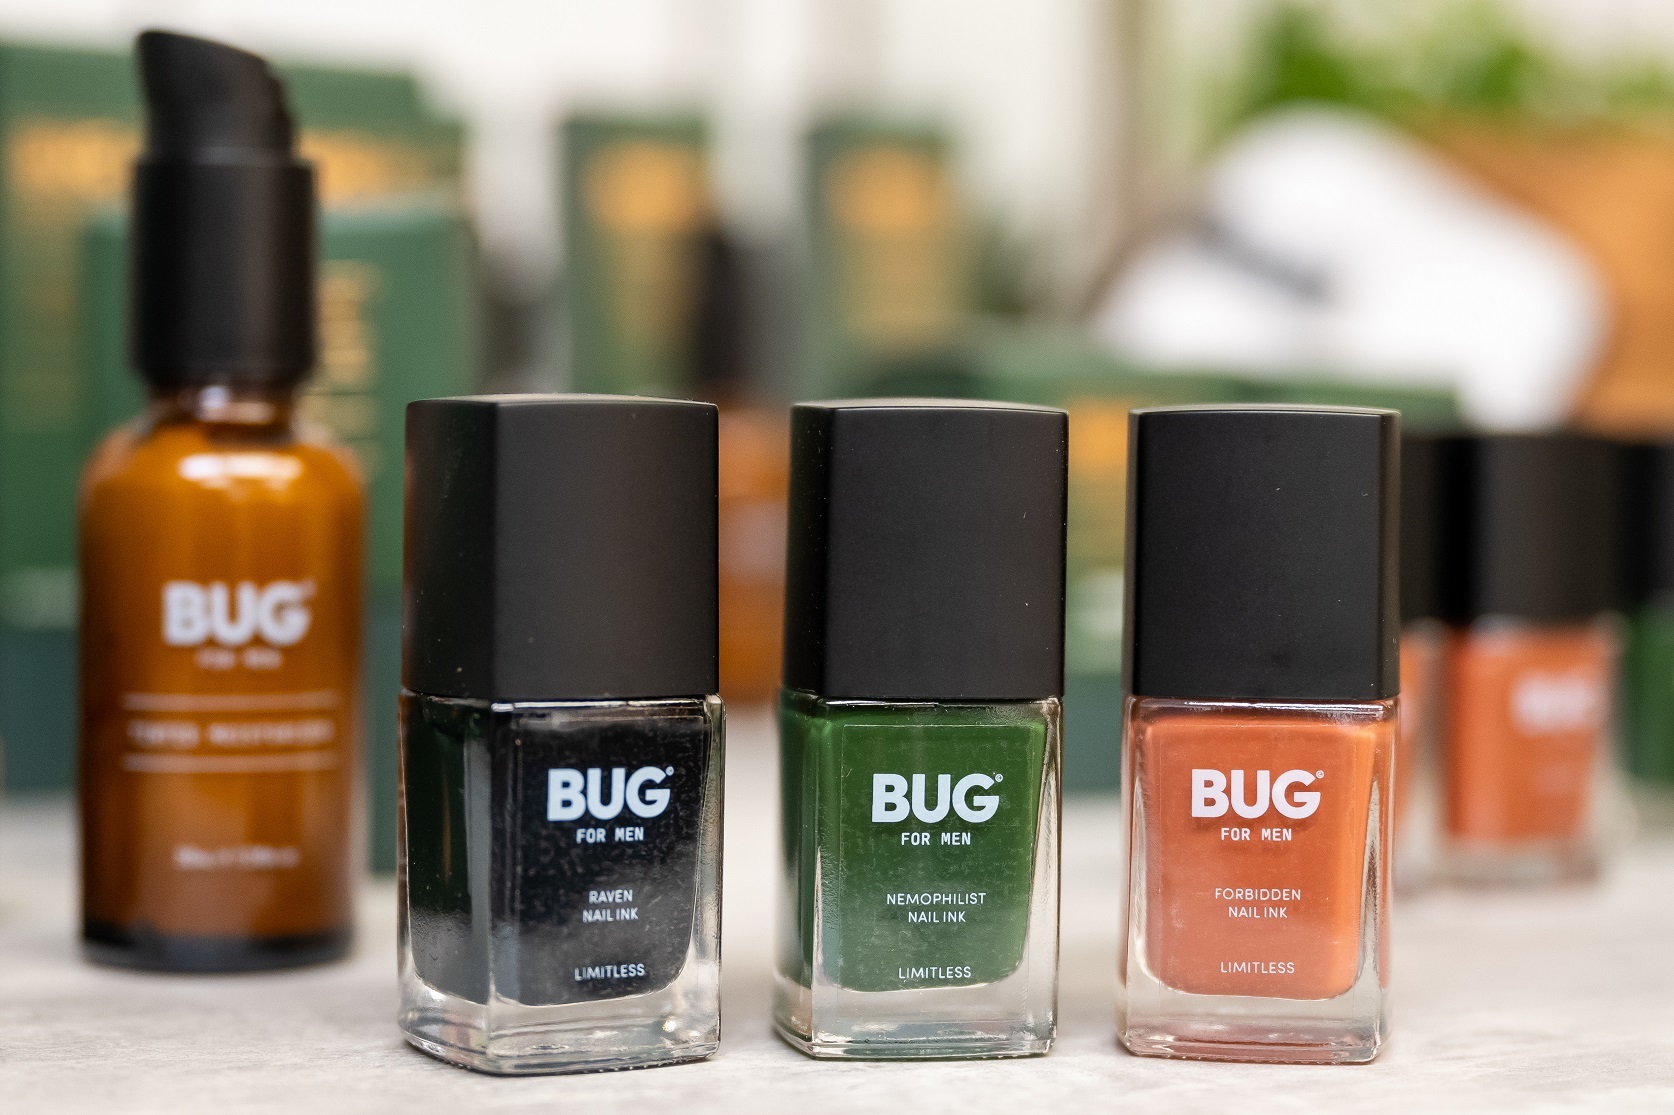 A range of BUG for Men products. Picture: Matthew Horwood/Development Bank of Wales